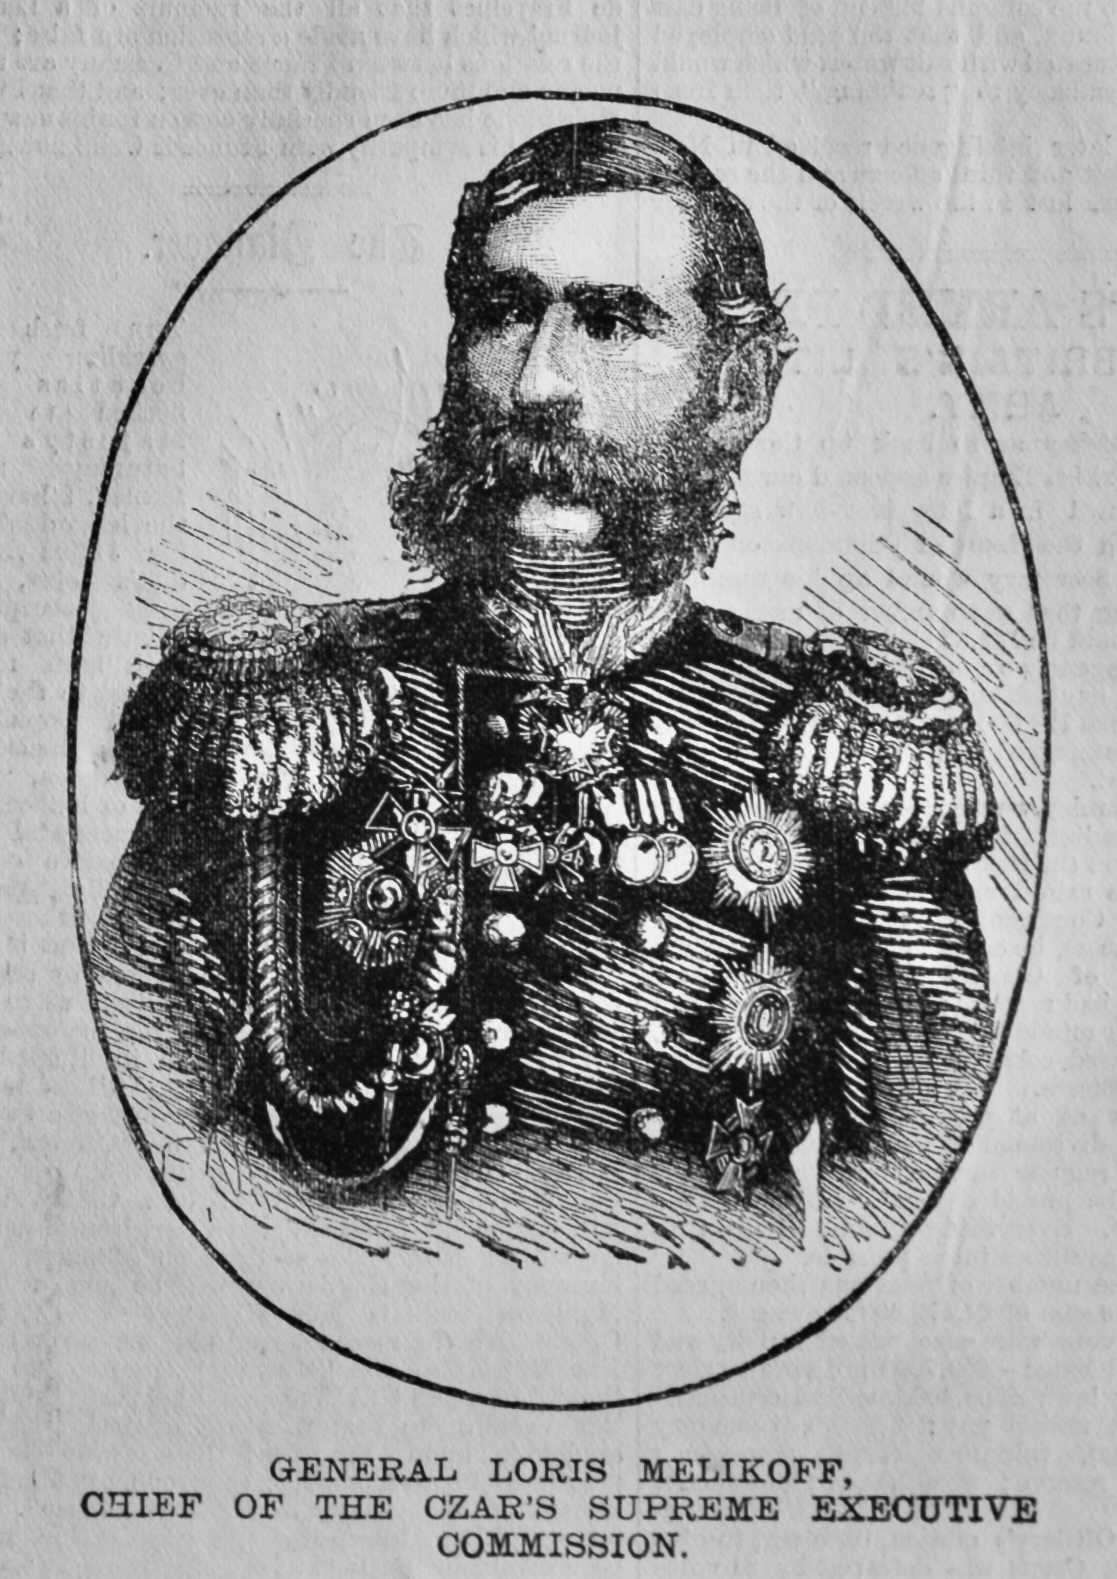 General Loris Melikoff, Chief of the Czar's Supreme Executive Commission.  